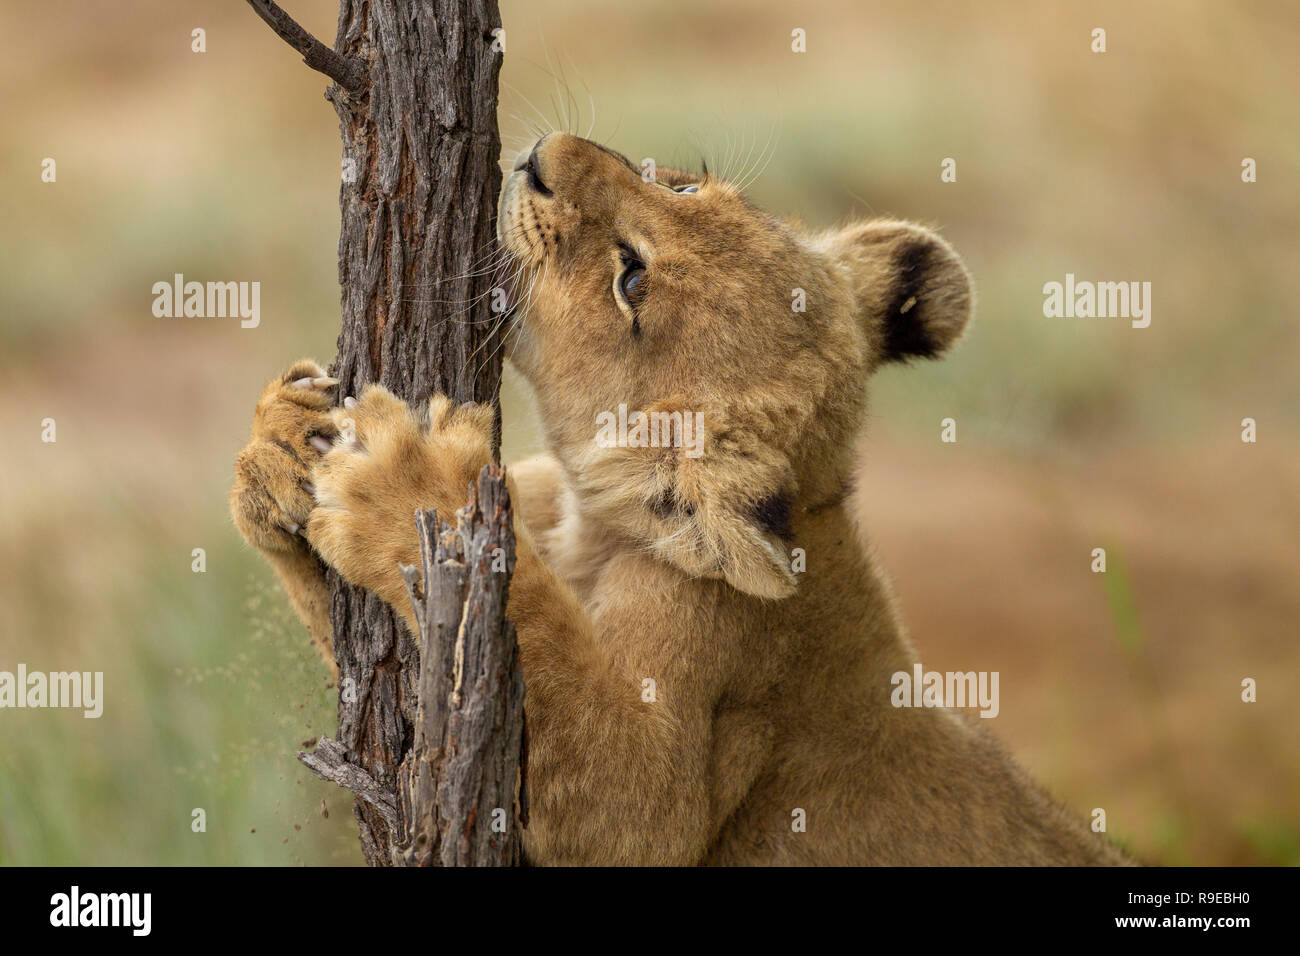 cute little lion cub playing and holding treestump Stock Photo